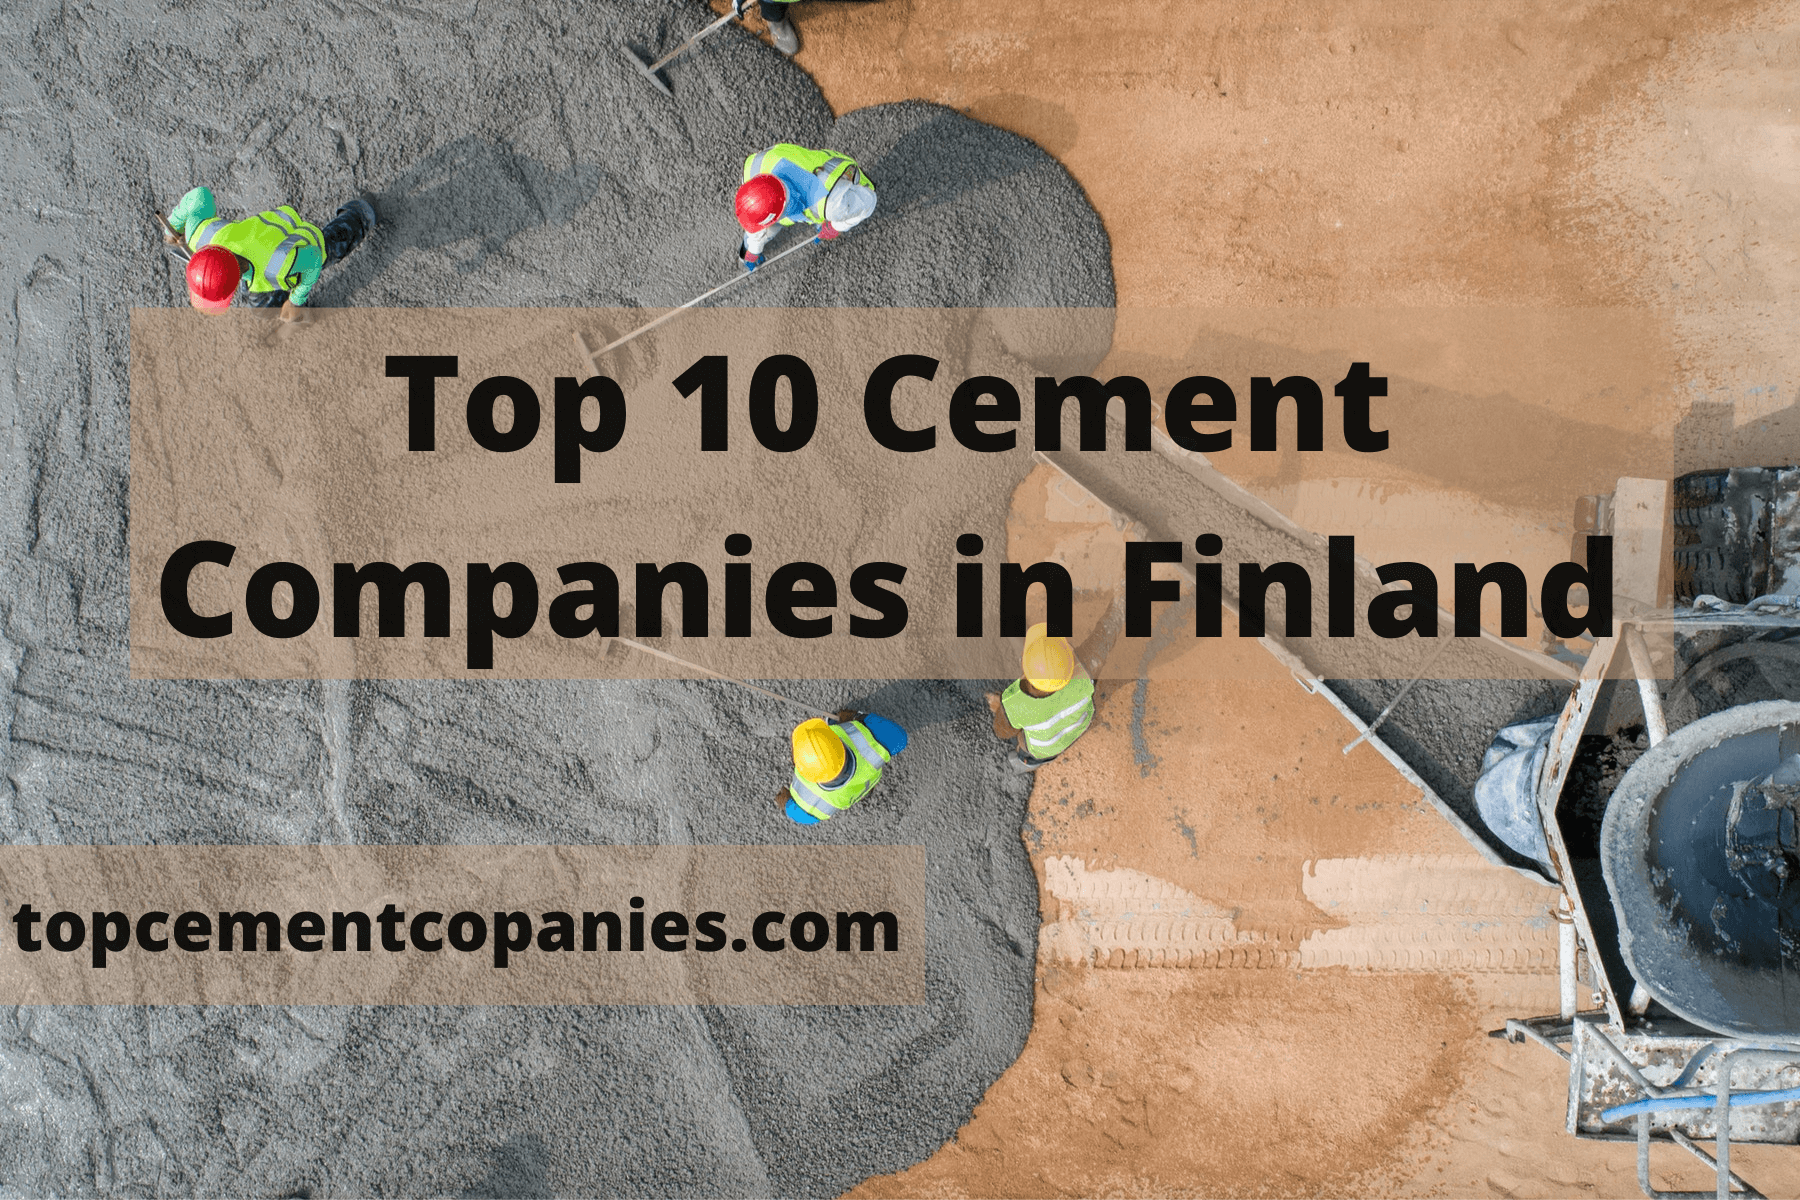 Top 10 Cement Companies in Finland - Top Cement Companies